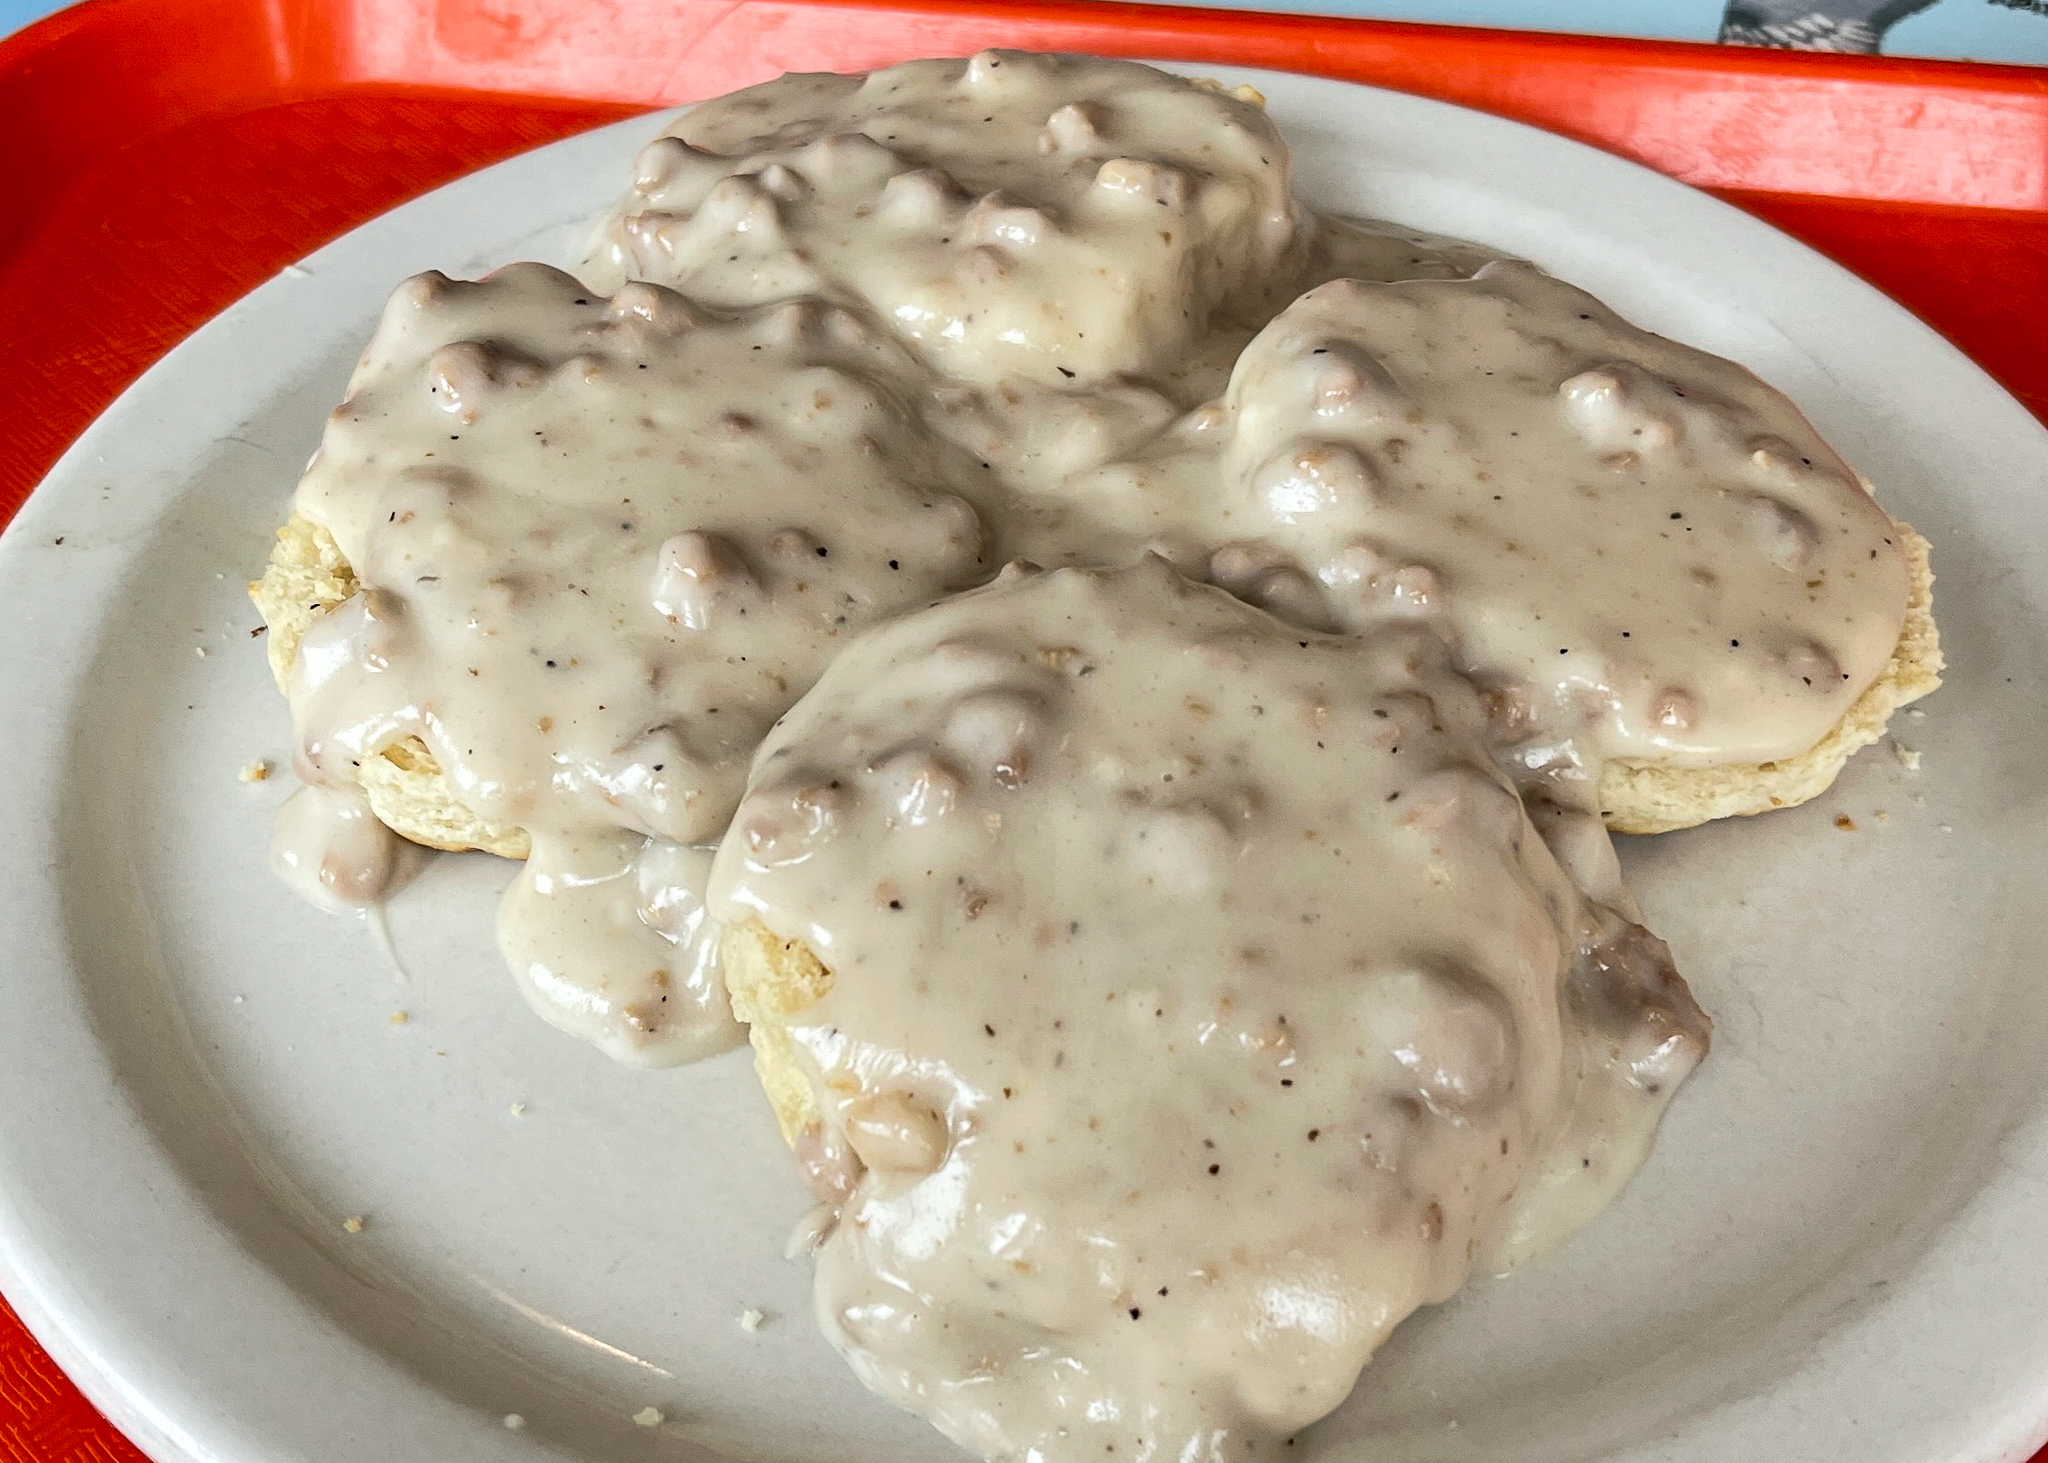 A plate of biscuits and gravy for breakfast on the MV Matanuska Alaska ferry.